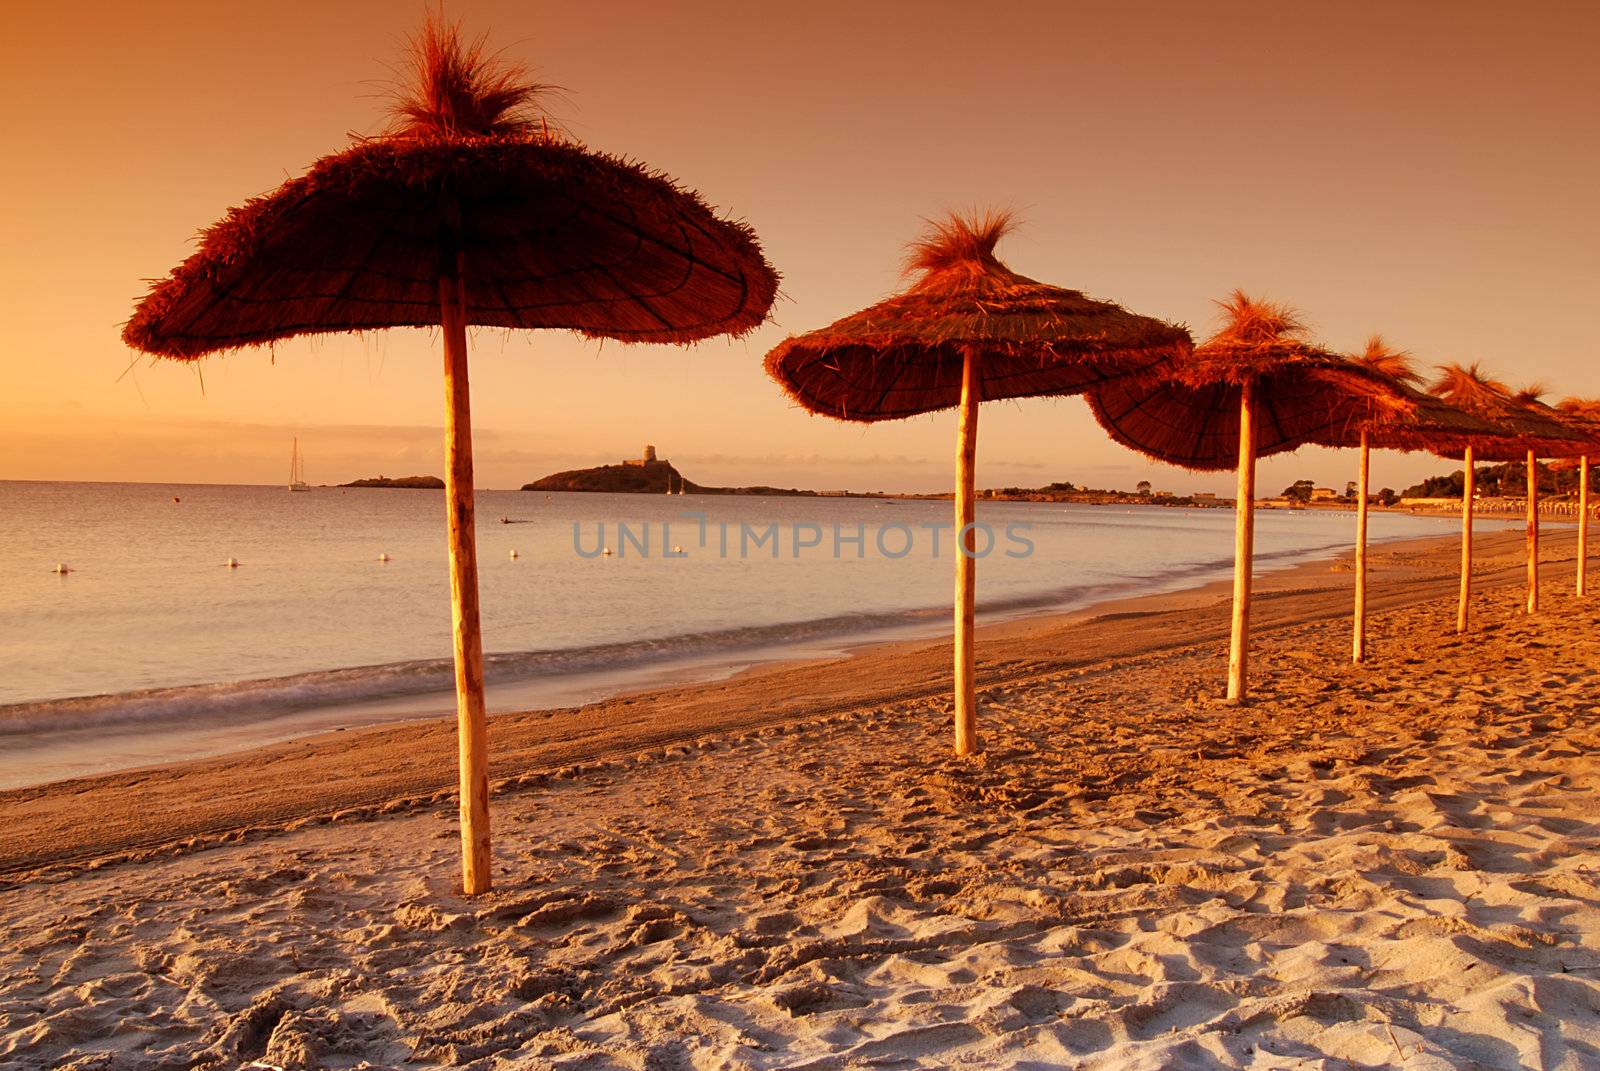 Ubrellas on the empty beach early evening by the sunset